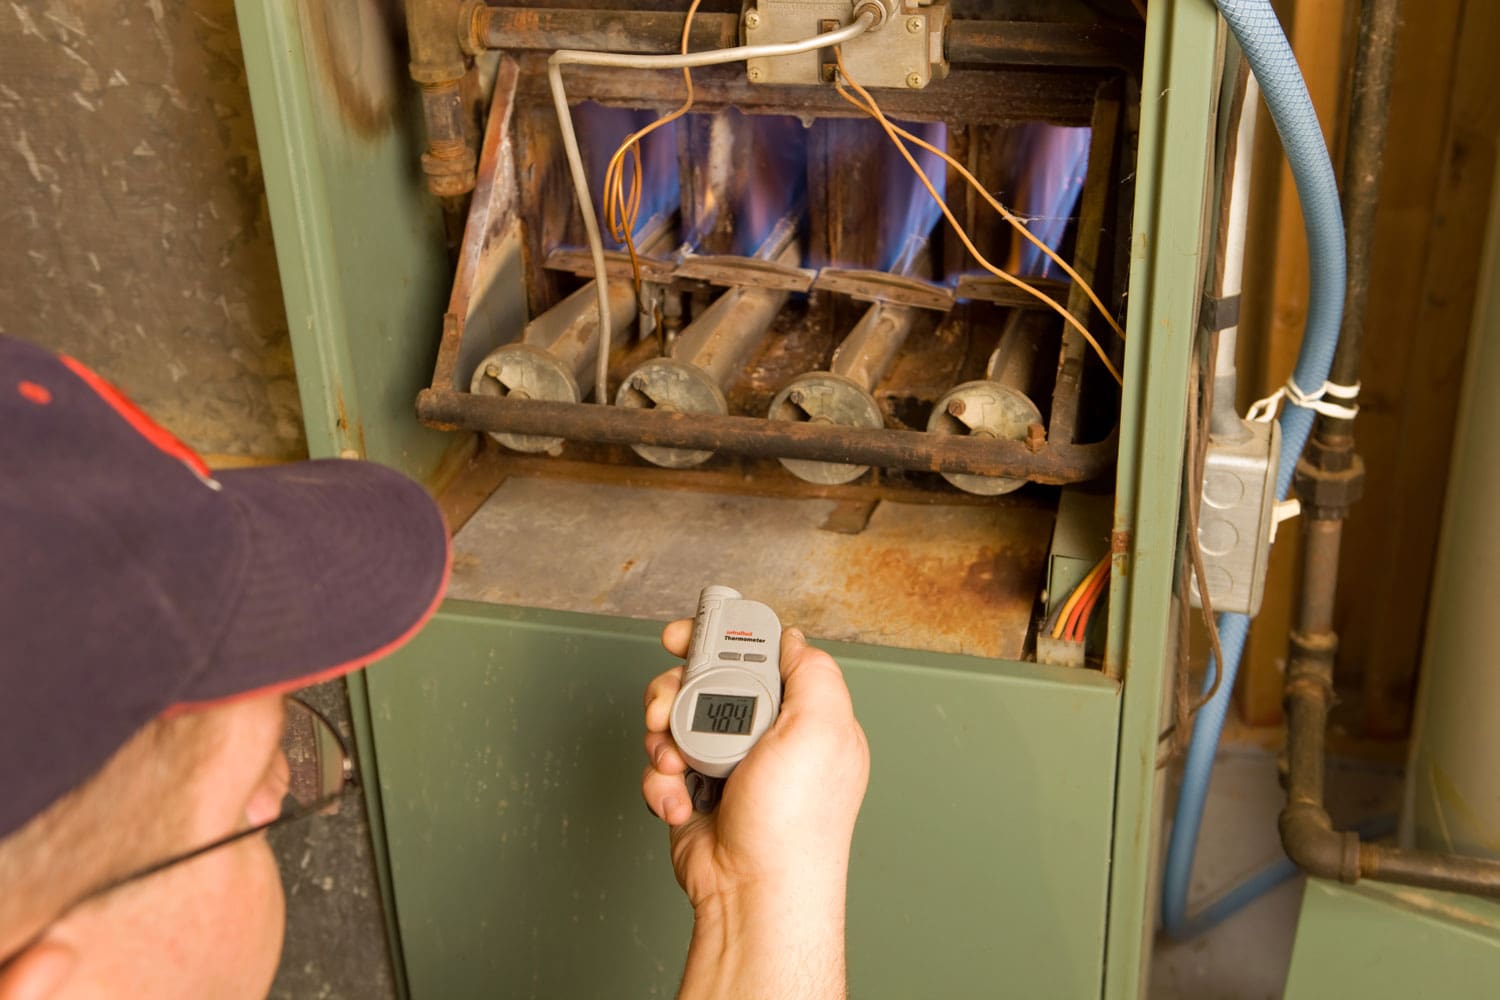 A man measuring the temperature of the gas furnace